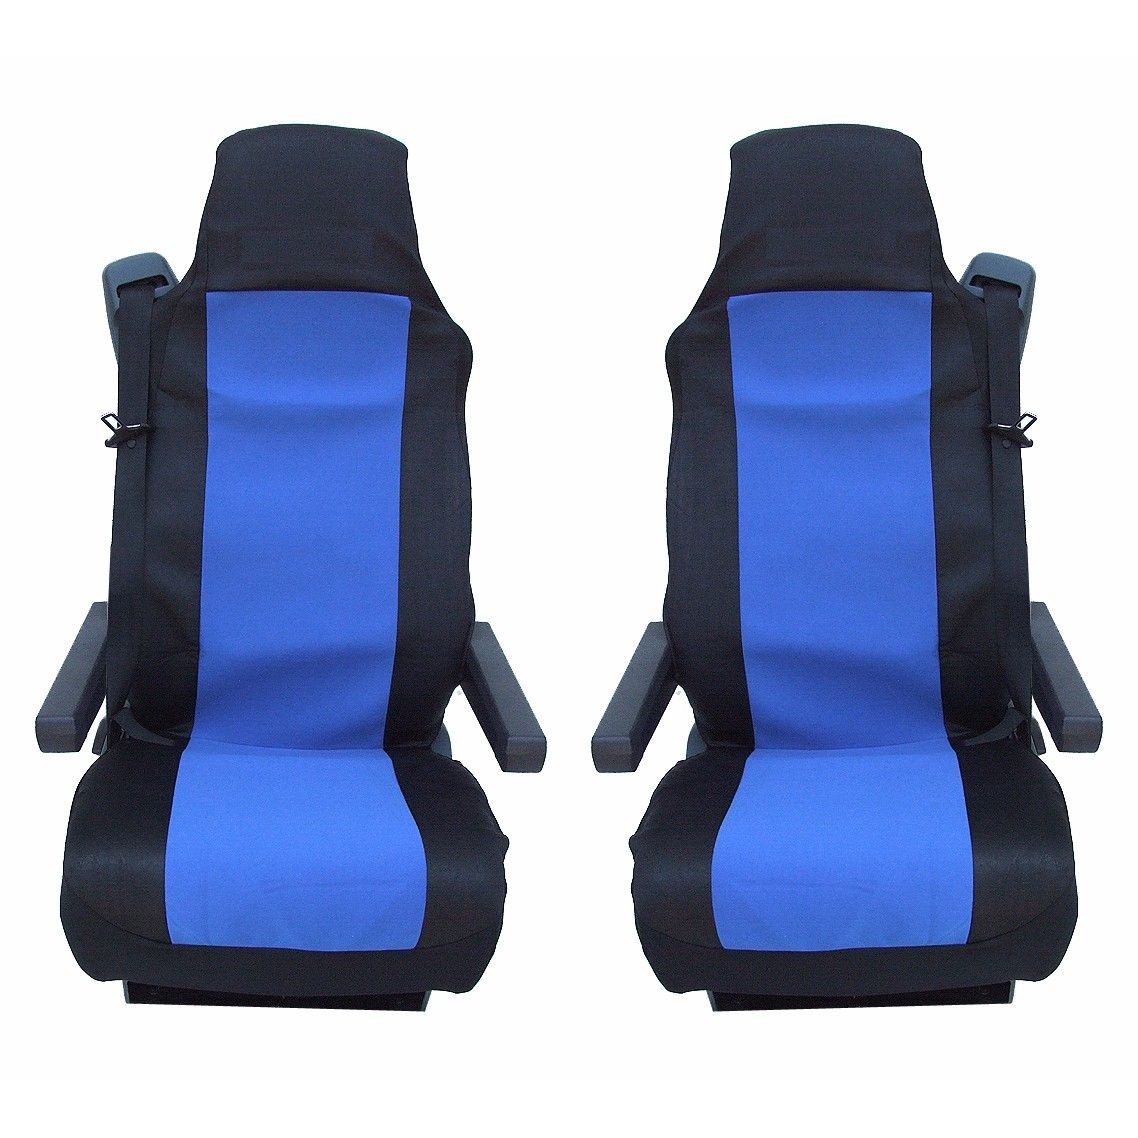 2 x Seat covers for Mercedes Actros Axor Atego Truck Black Blue Textile